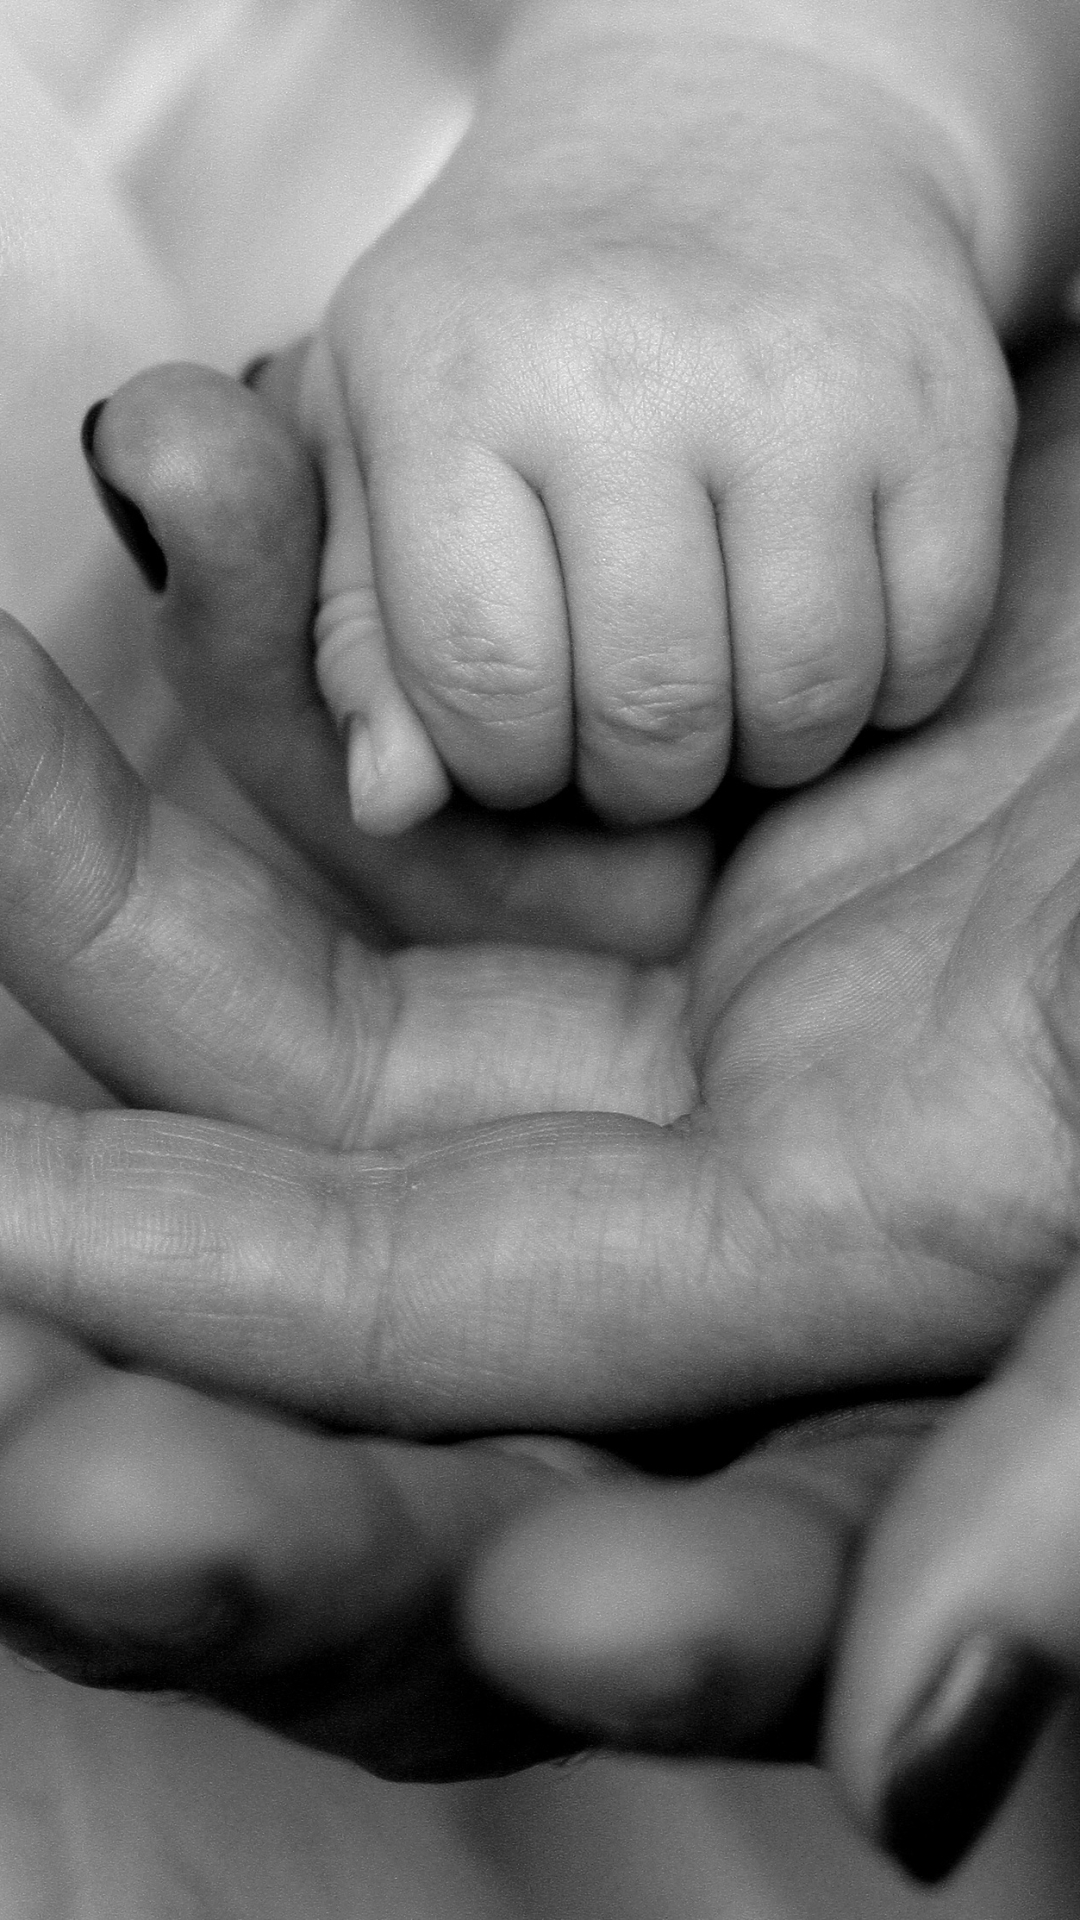 Father, Mother and Baby's Hands by AdinaVoicu - Mobile Abyss